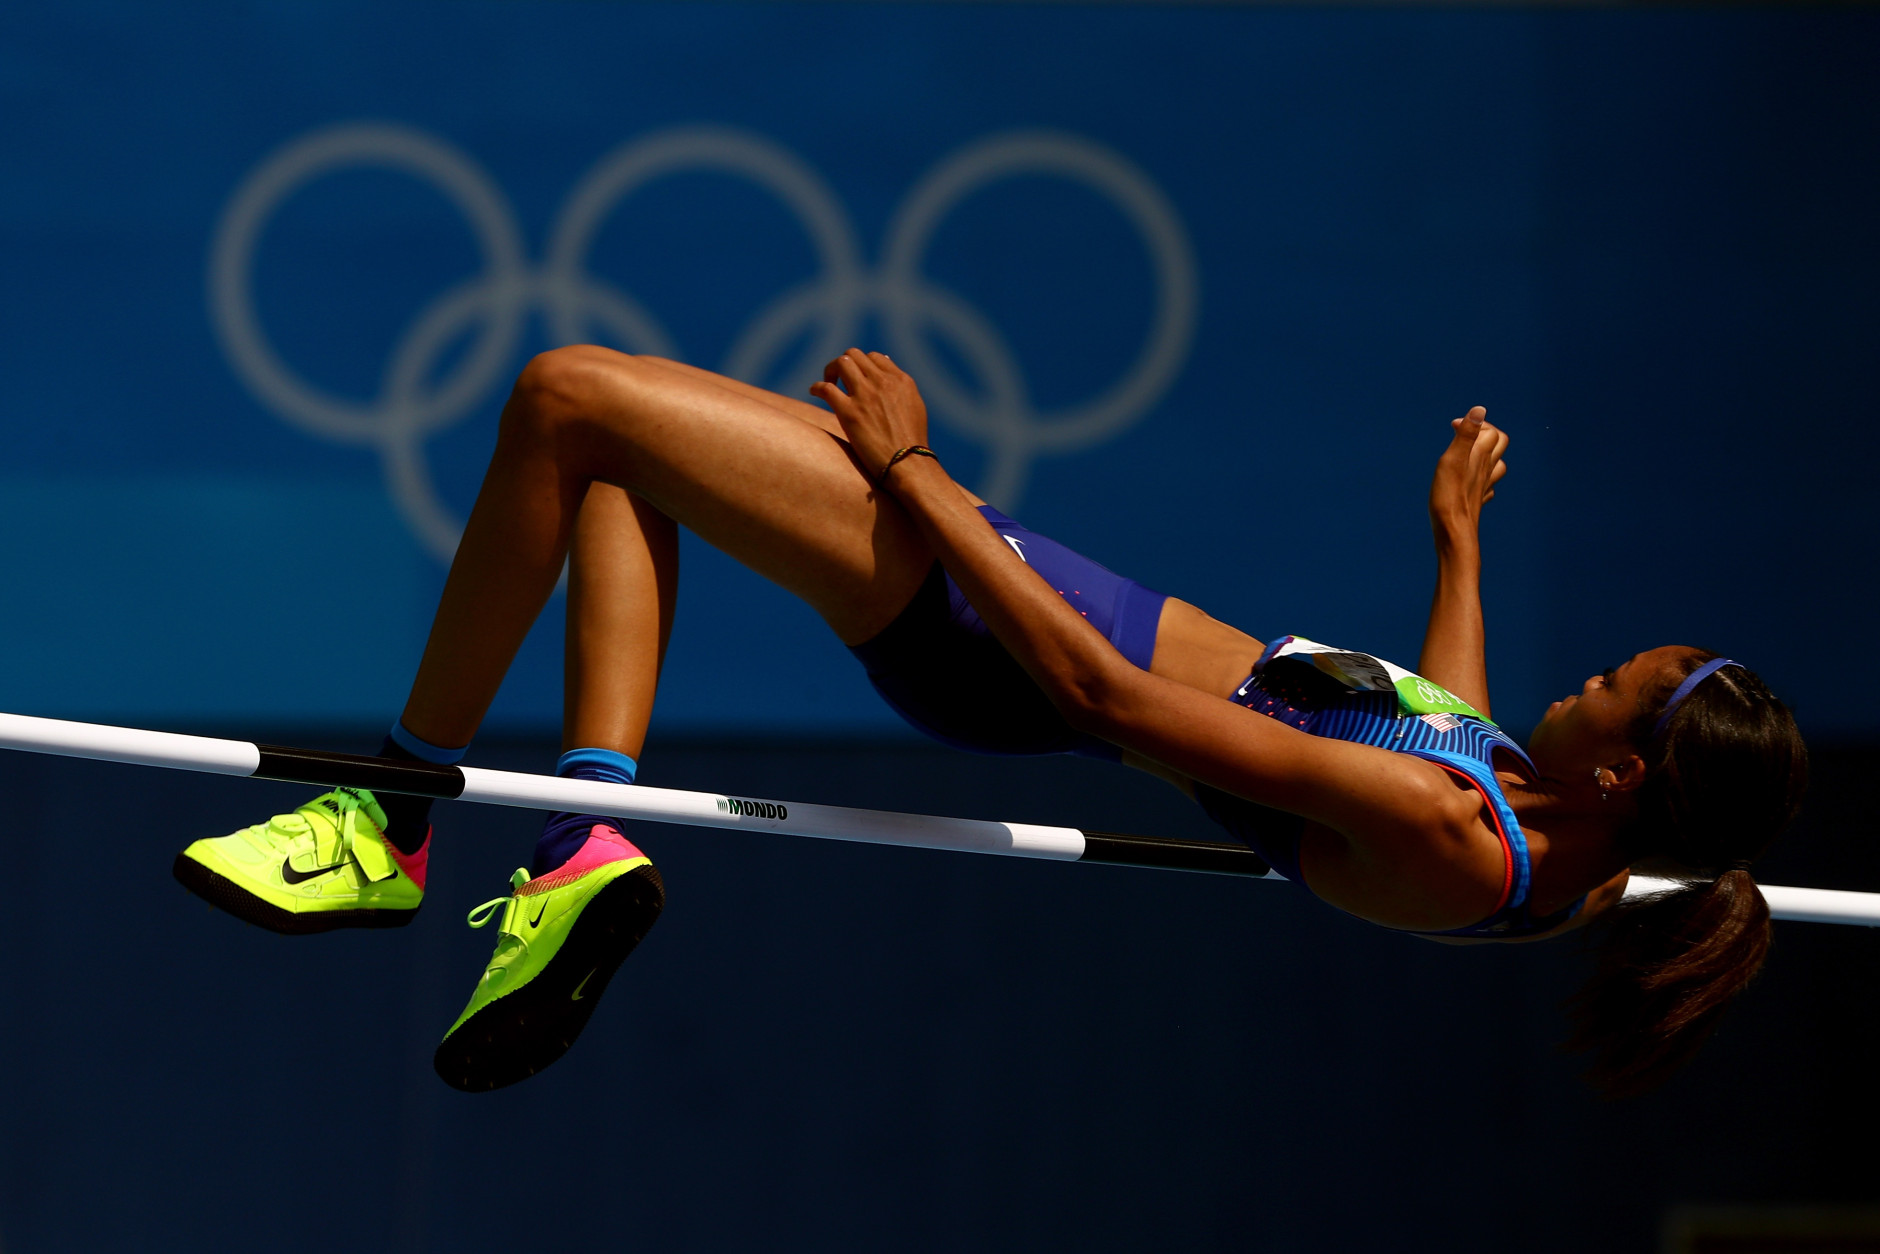 RIO DE JANEIRO, BRAZIL - AUGUST 18:  Vashti Cunningham of the United States competes in Women's High Jump Qualifying on Day 13 of the Rio 2016 Olympic Games at the Olympic Stadium on August 18, 2016 in Rio de Janeiro, Brazil.  (Photo by Ian Walton/Getty Images)